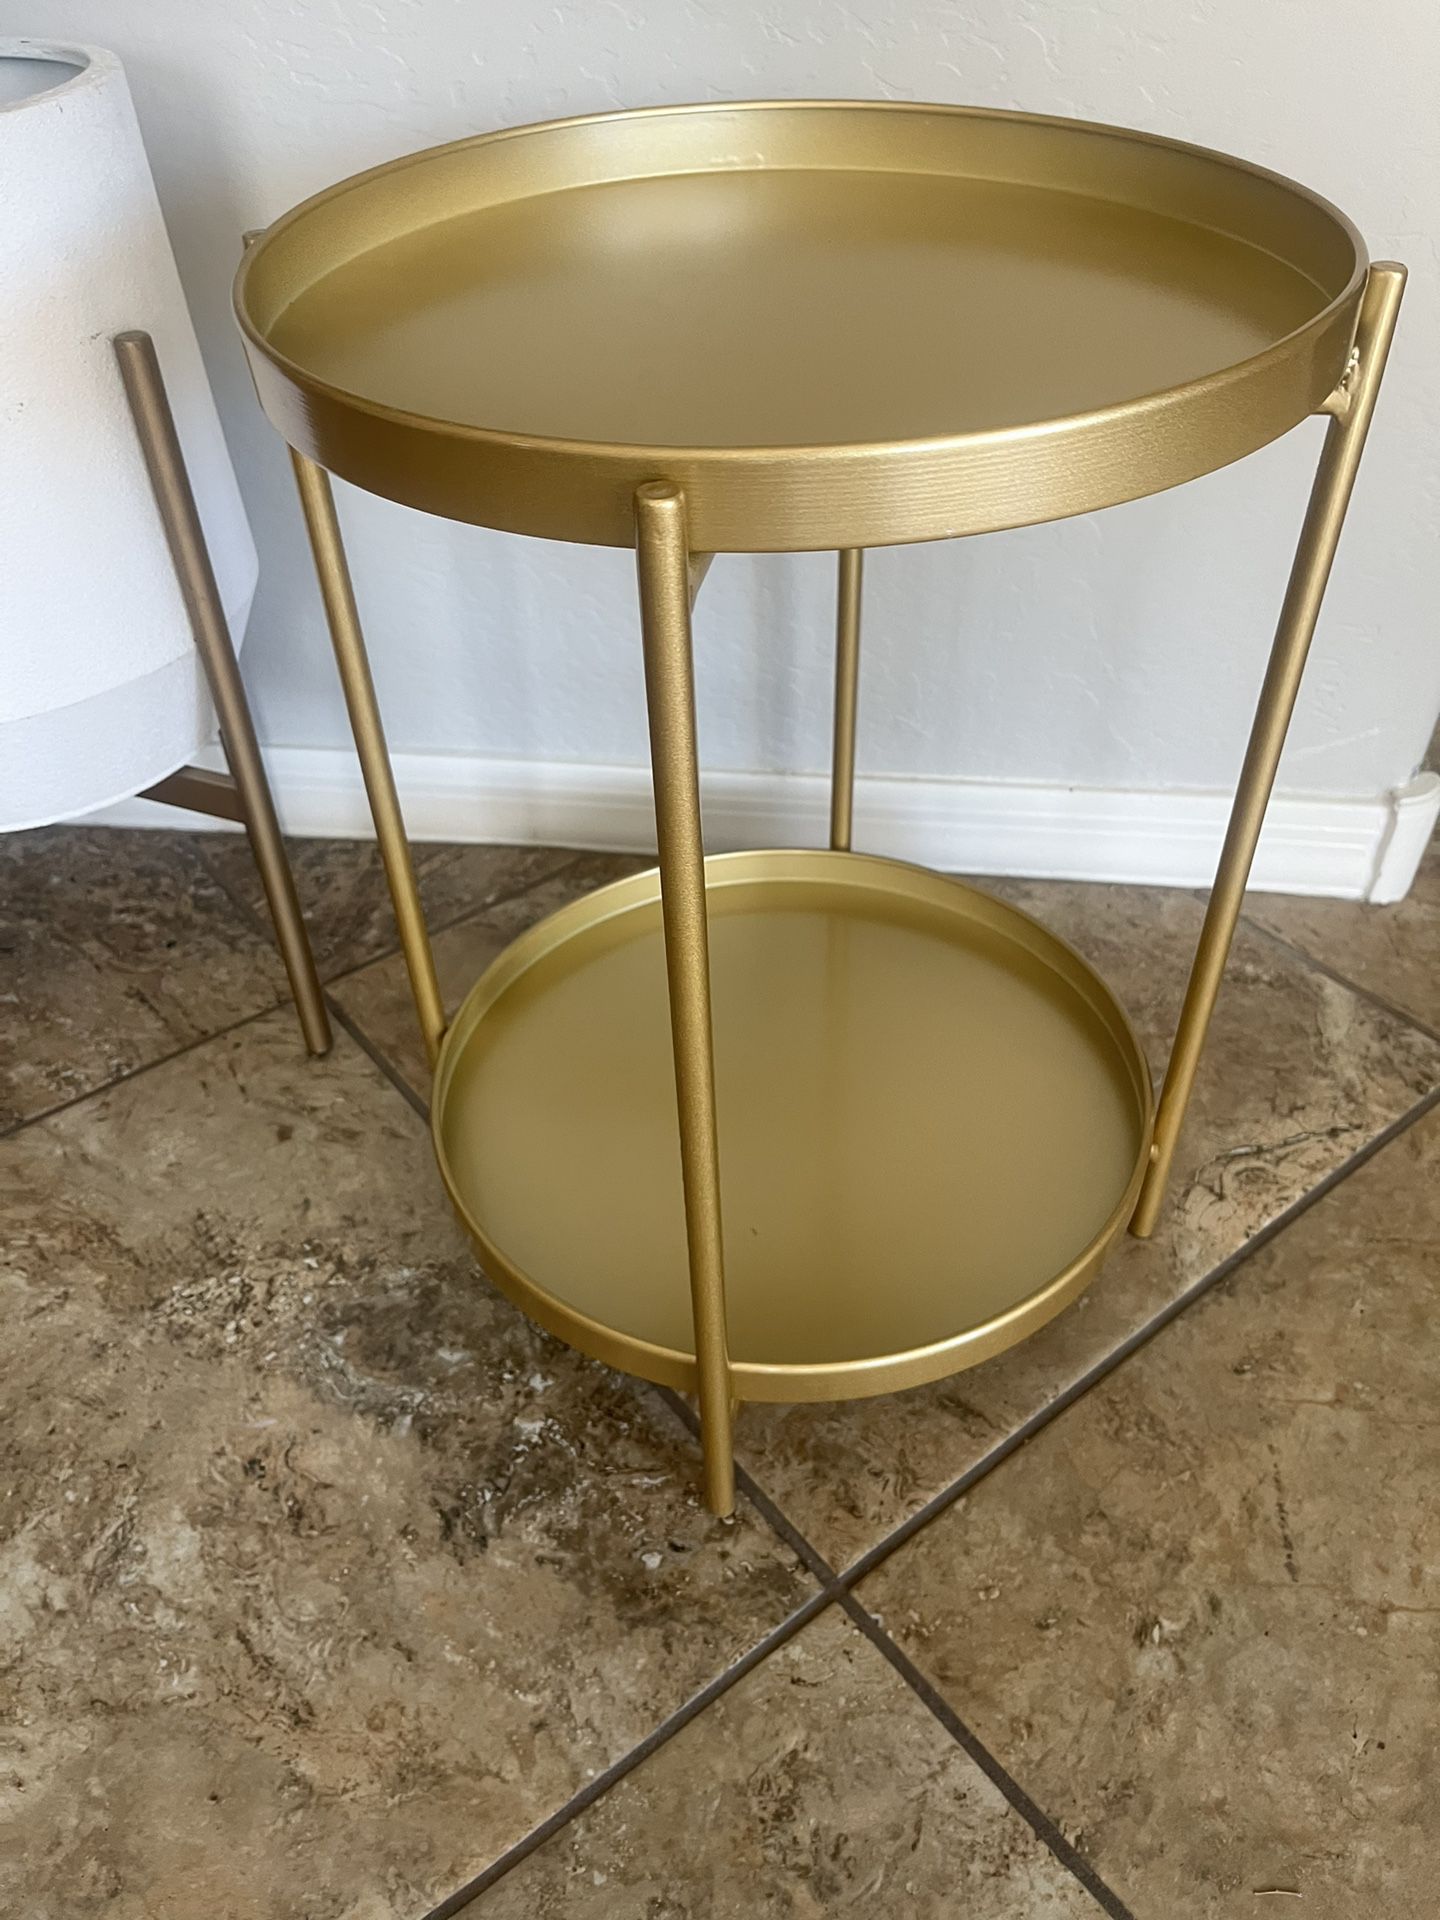 New Gold End Table